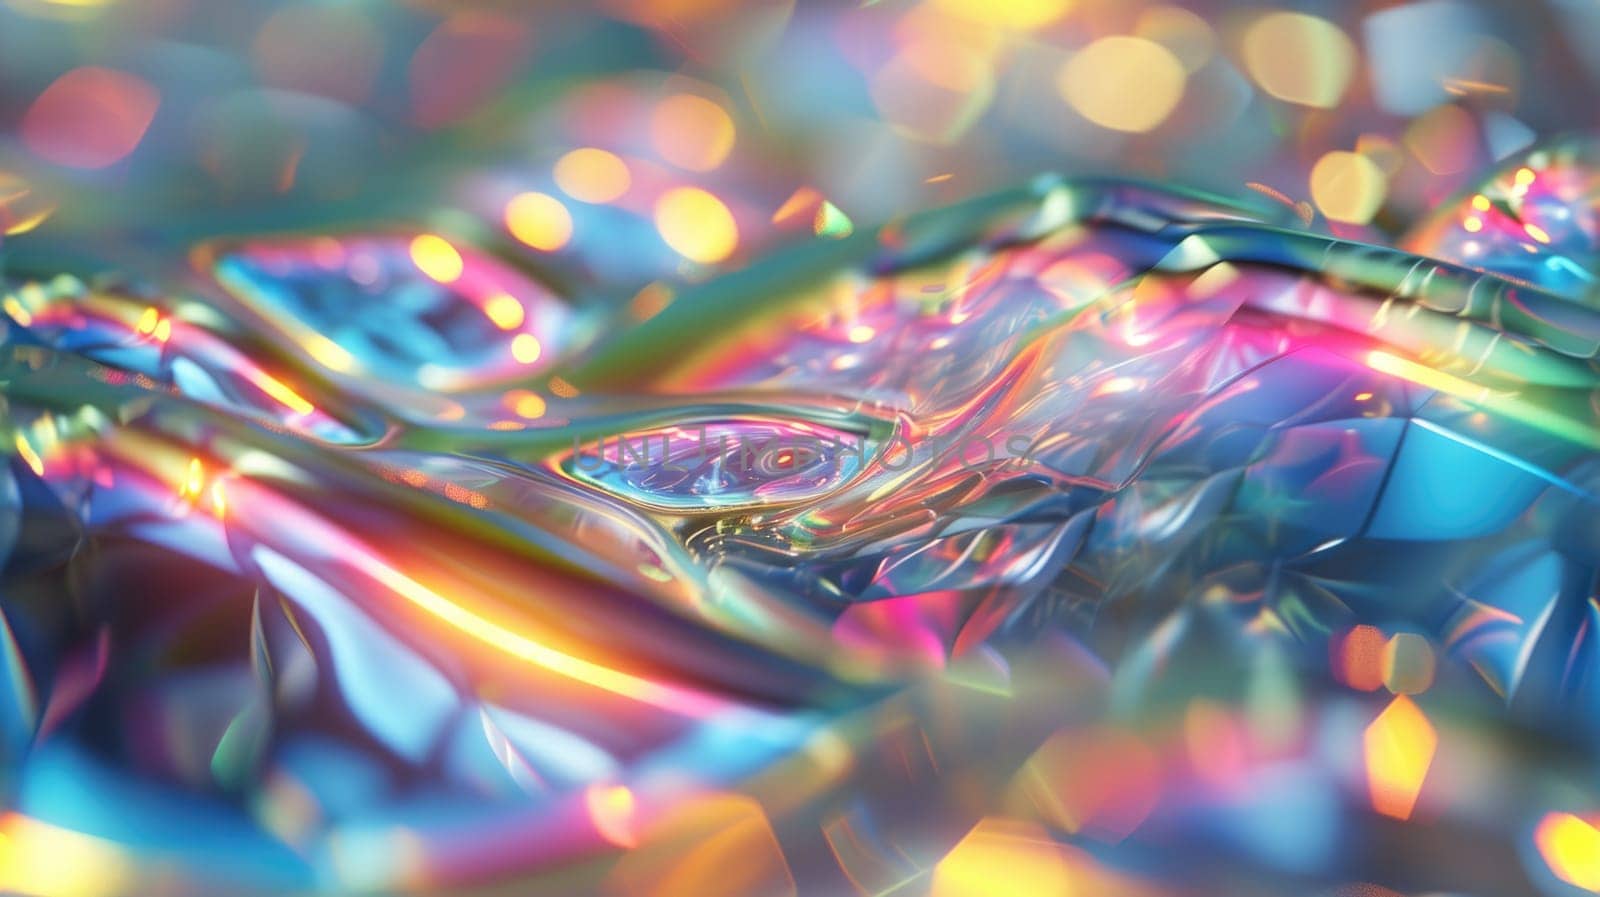 The rainbow hologram abstract picture in form of the brightly glittering wave that seems like liquid yet looks solid at the same time and also bright with the source of the light of itself. AIGX01.